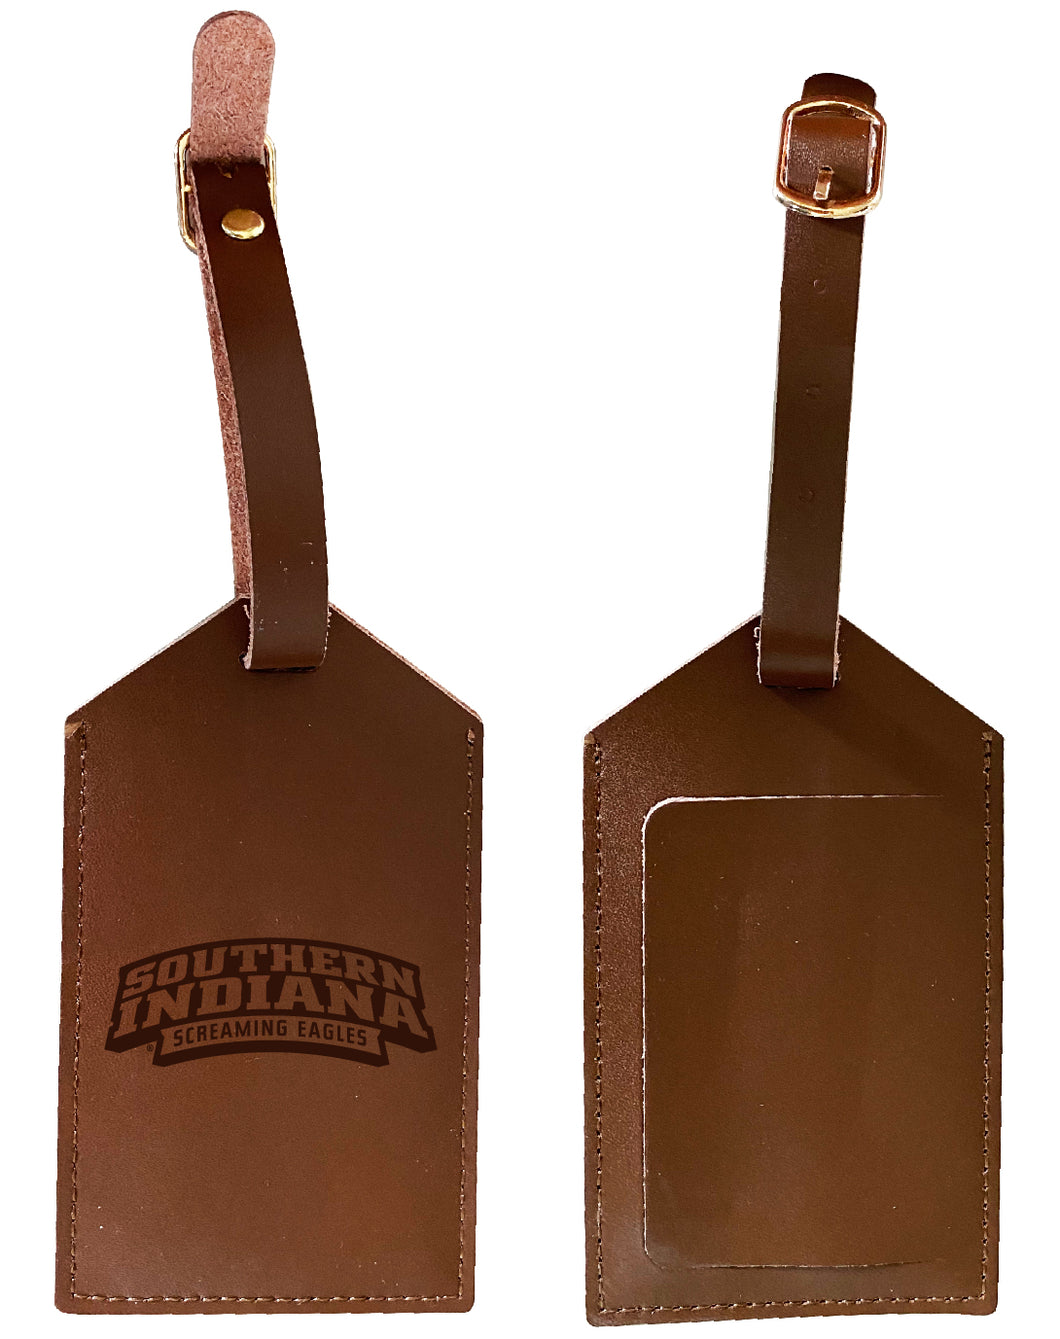 University of Southern Indiana Leather Luggage Tag Engraved